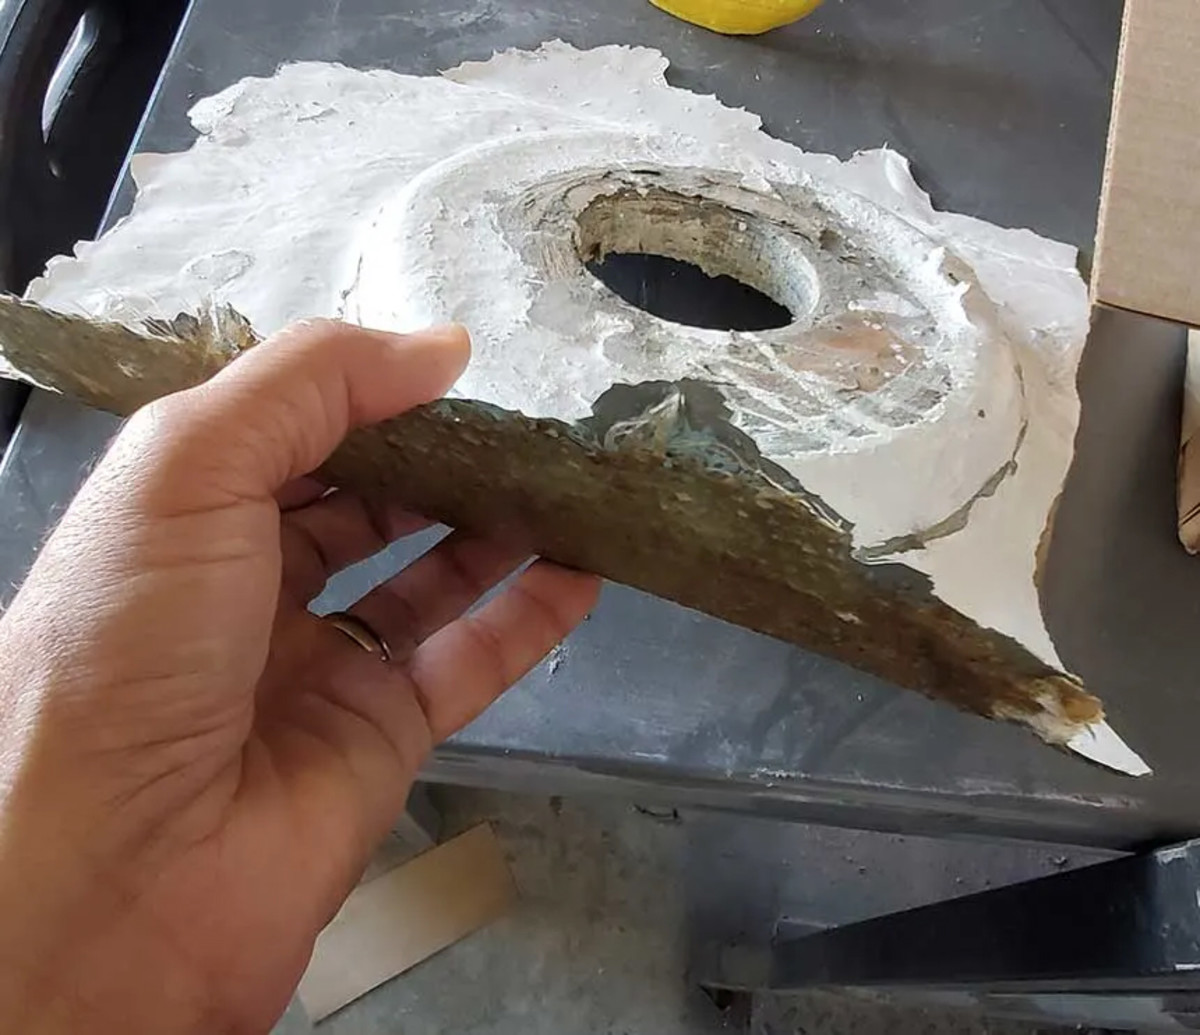 Polyester resin does not bond reliably to cured polyester. This part popped loose from the hull due to a failed bond, as a result of a poor resin choice and poor preparation.